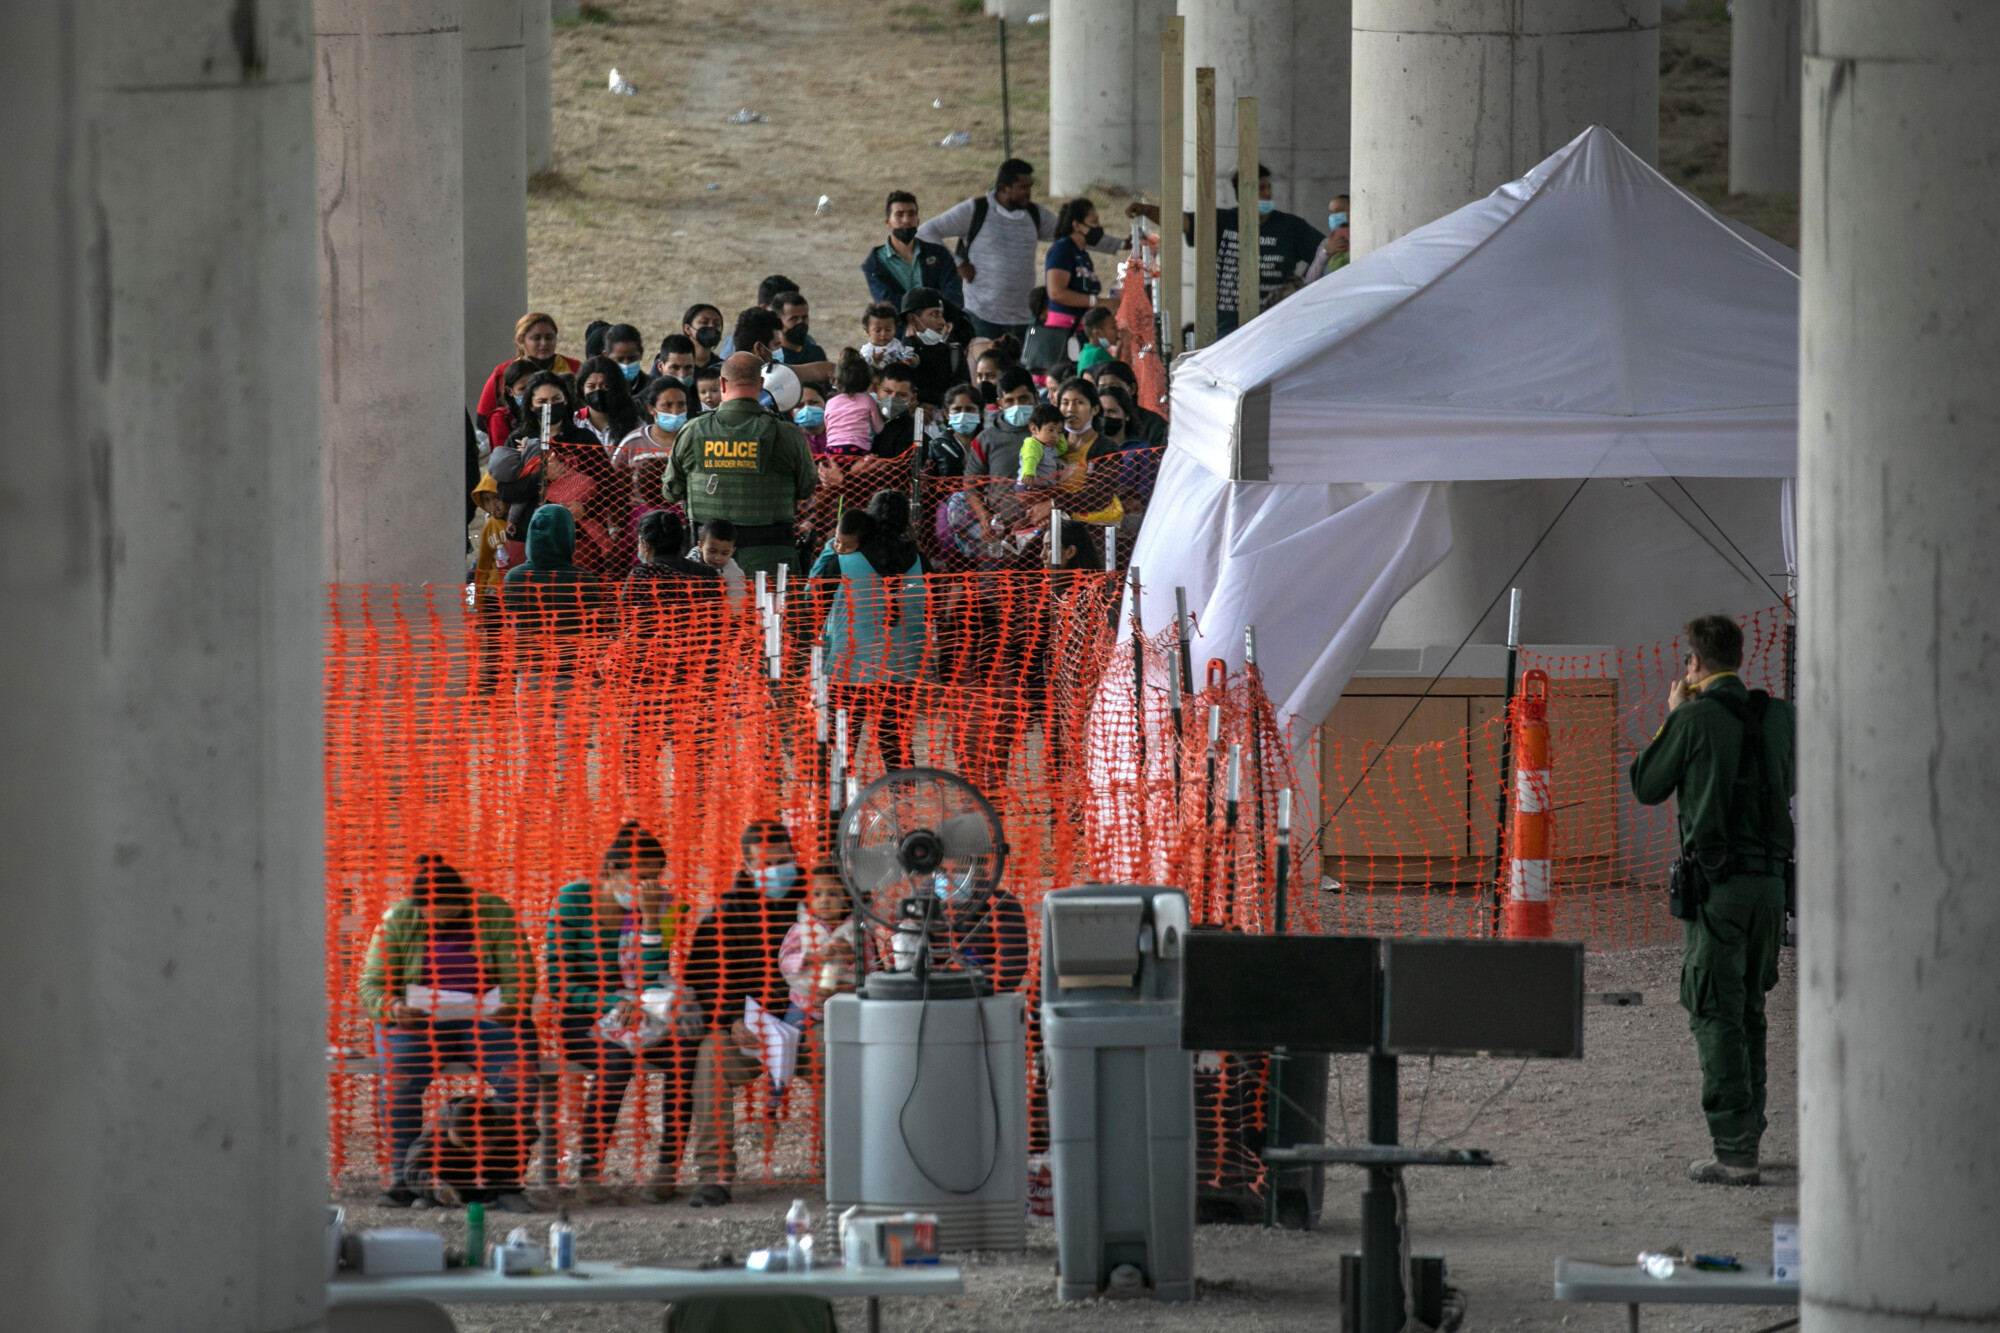 Biden Administration Opens yet Another Facility to Hold Surging Numbers of Immigrant Children